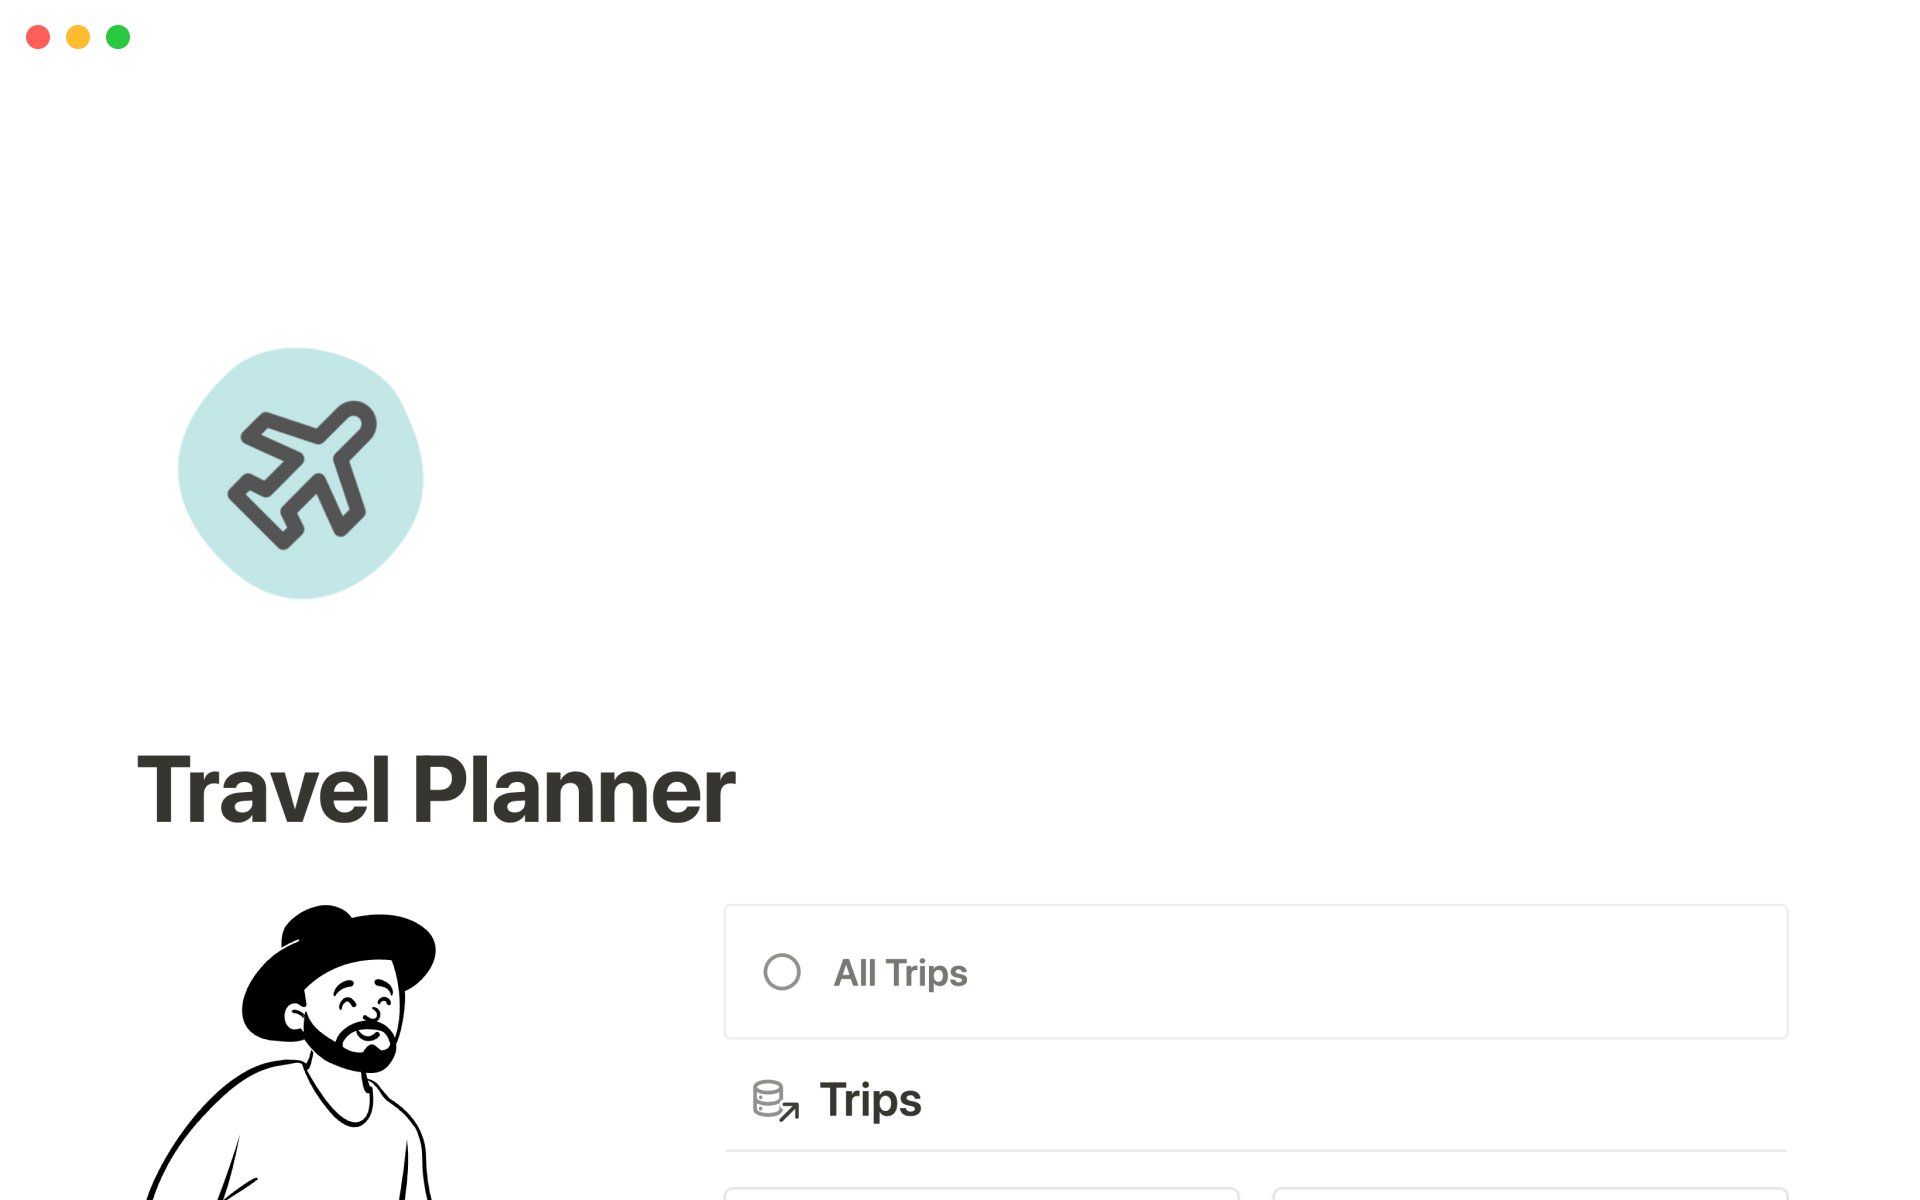 Plan, research and organise your trip — so you can track your travels in one place and move from clutter to clarity.